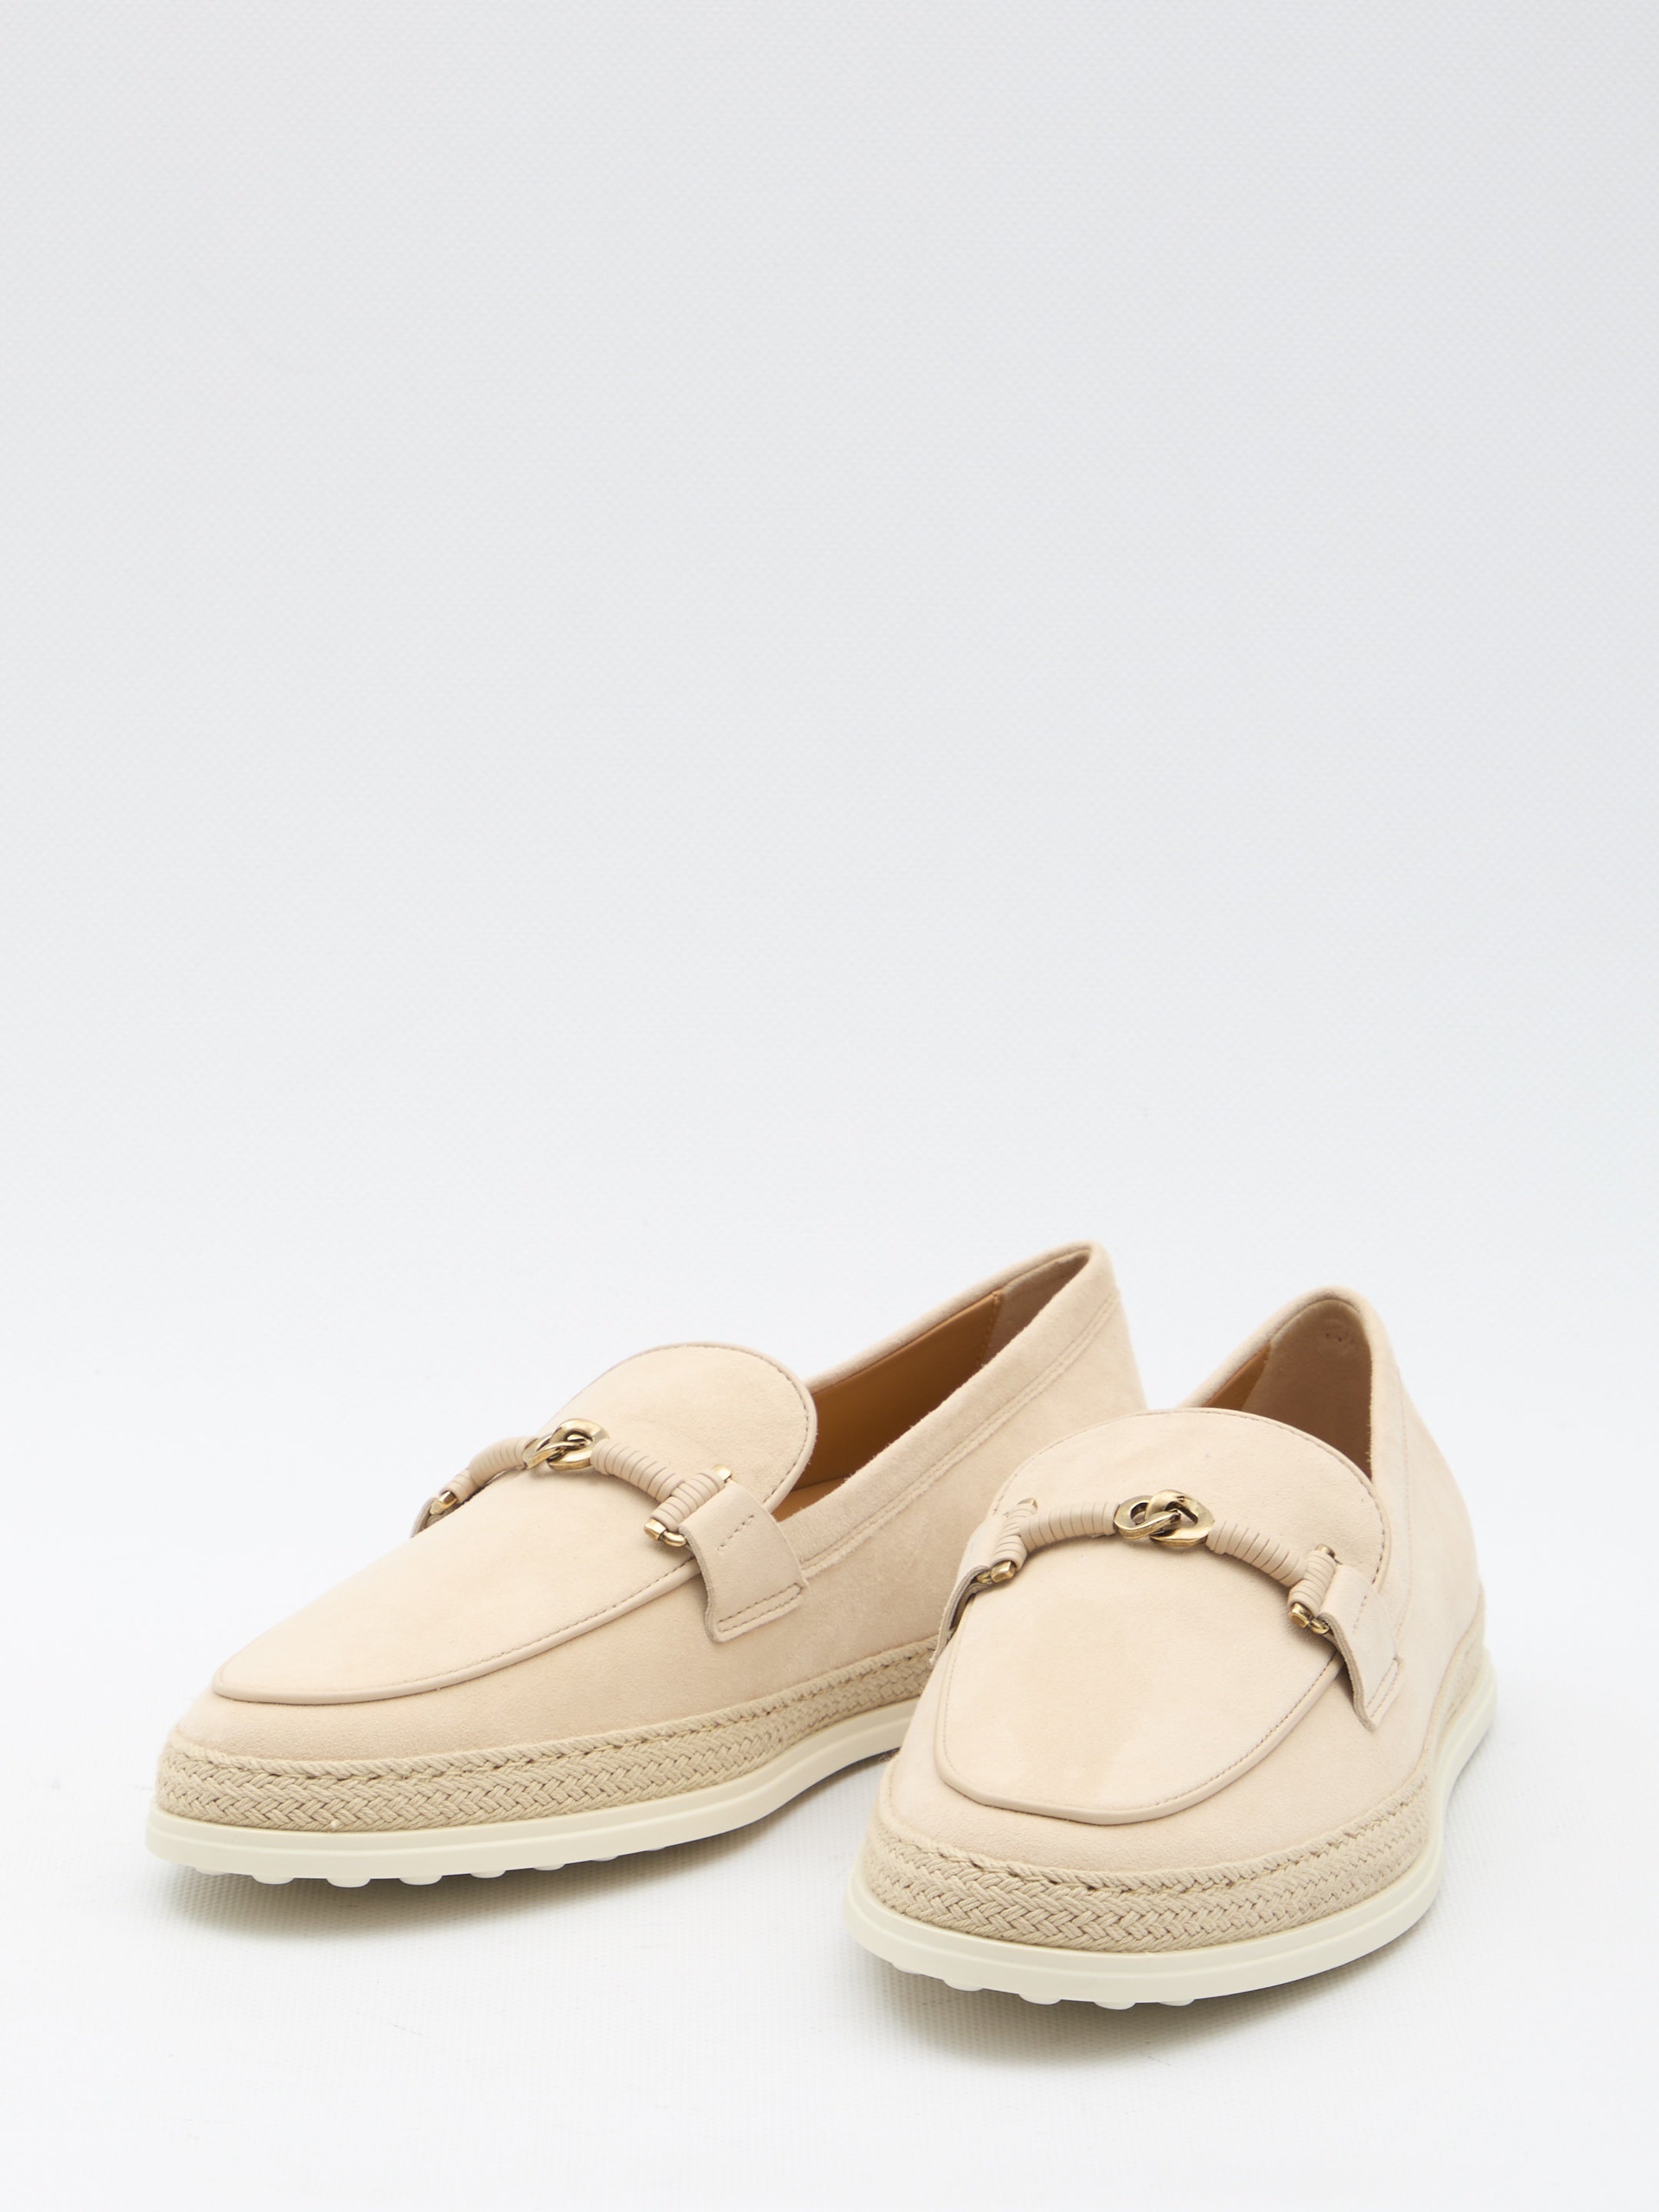 TODS-OUTLET-SALE-Suede-loafers-Flache-Schuhe-ARCHIVE-COLLECTION-2_17303176-5a84-4263-8dbe-39e854ea6a60.jpg